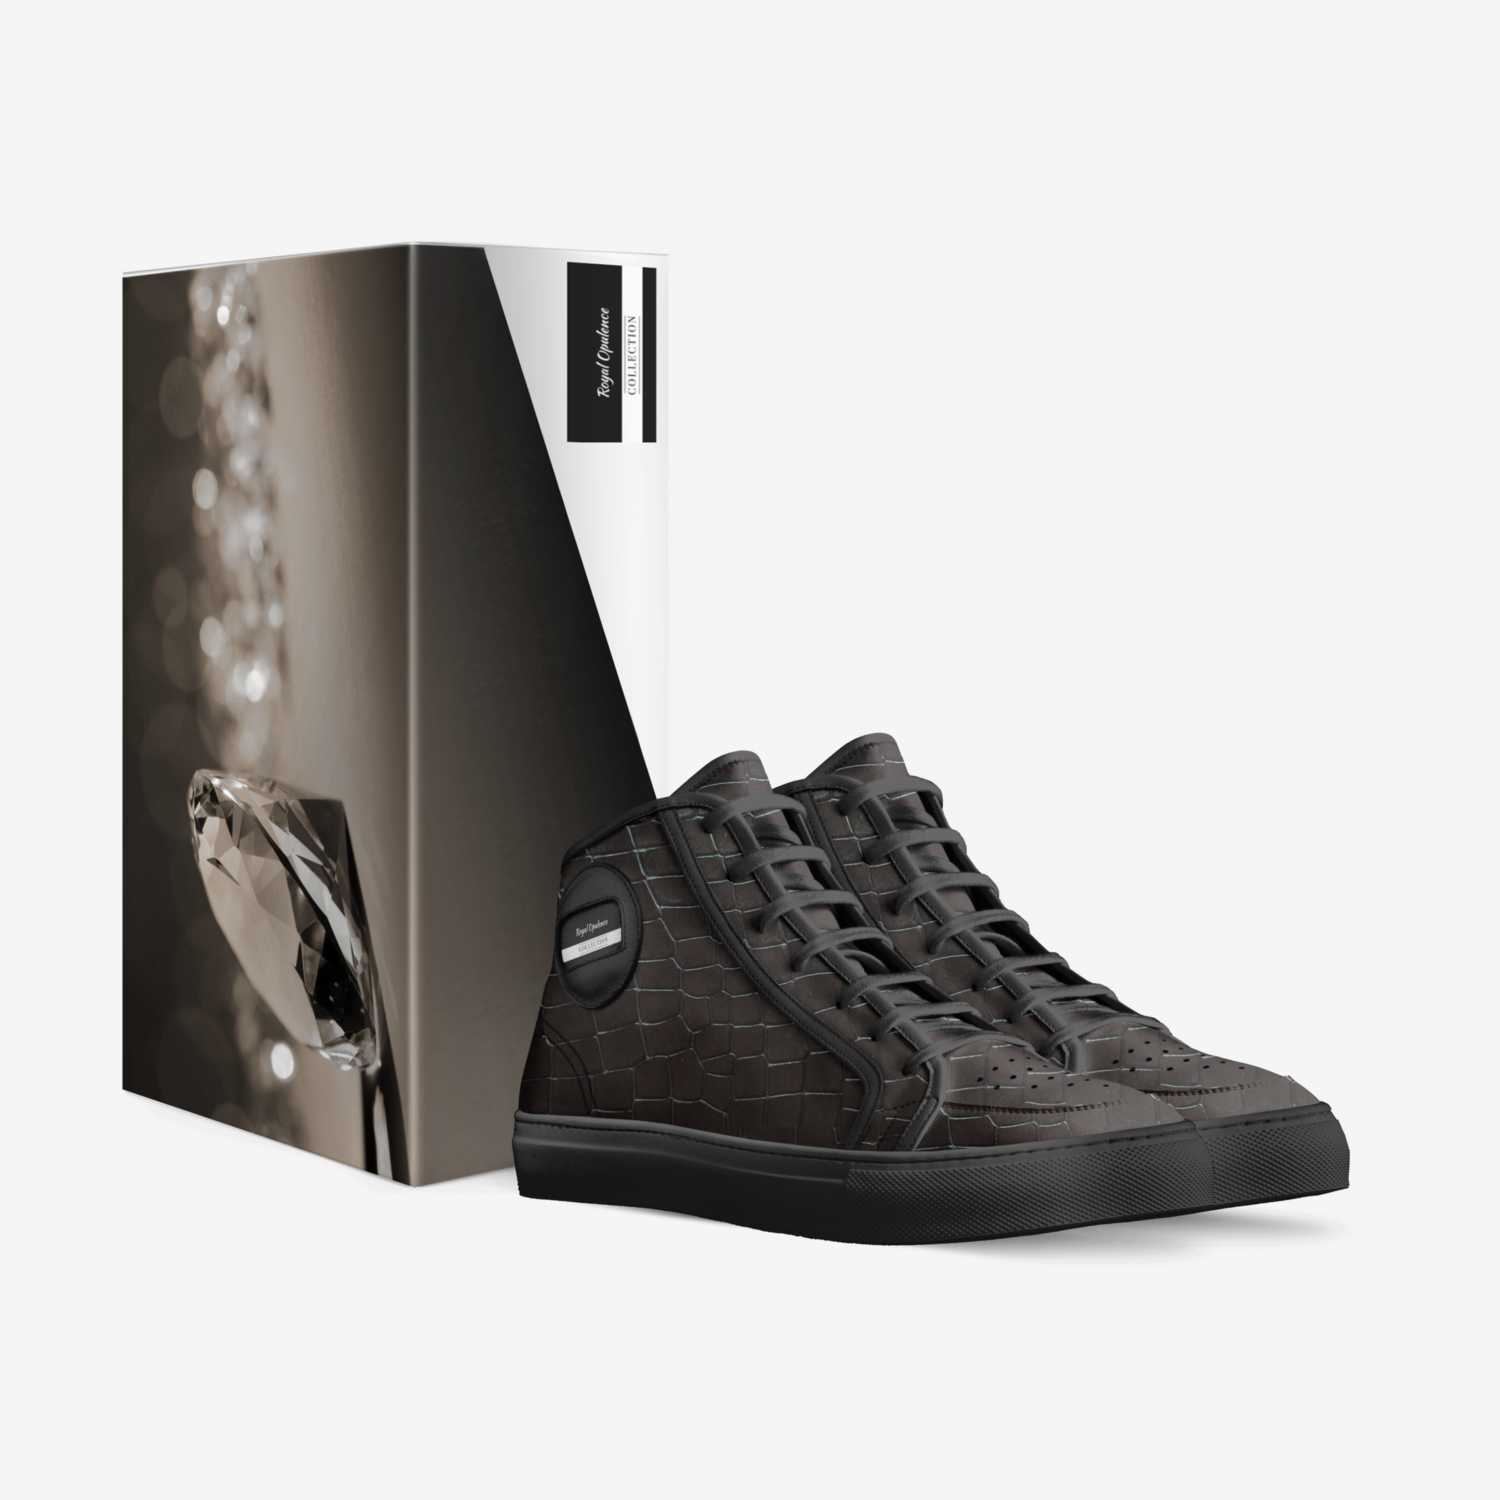 Royal Opulence custom made in Italy shoes by Melvin Stevens | Box view